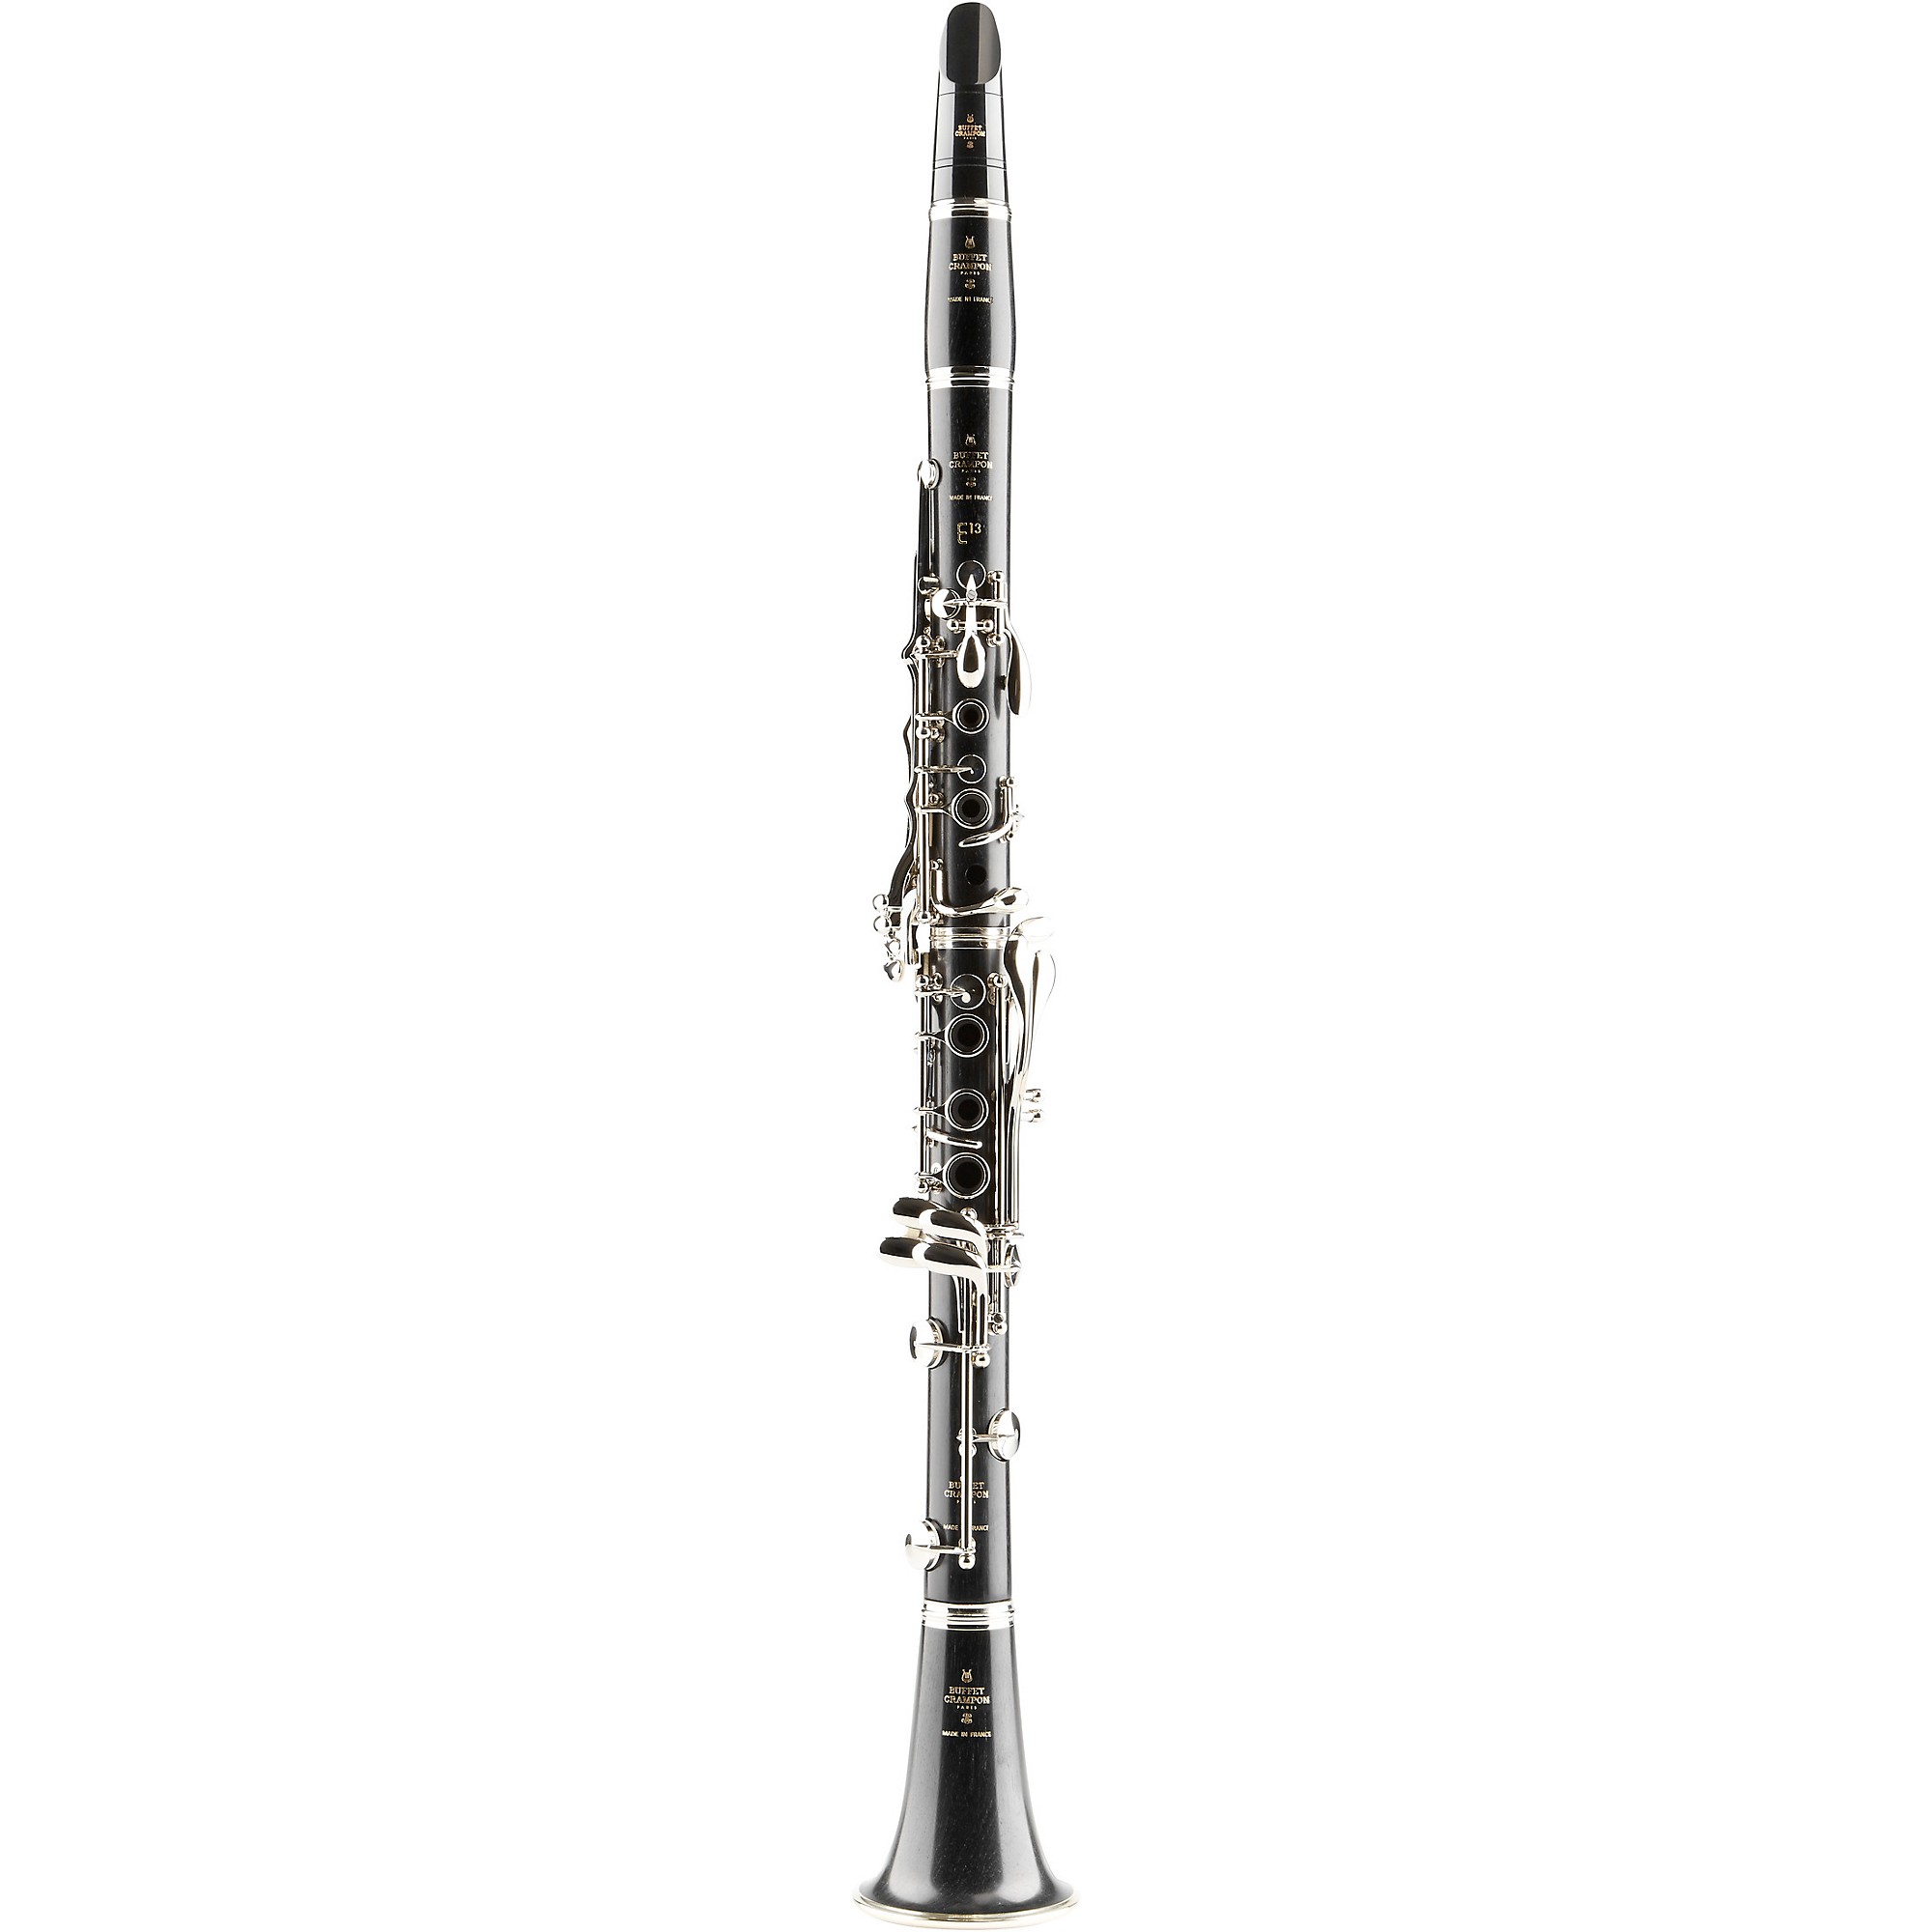 Buffet Crampon E13 Professional Bb Clarinet With Nickel-Plated